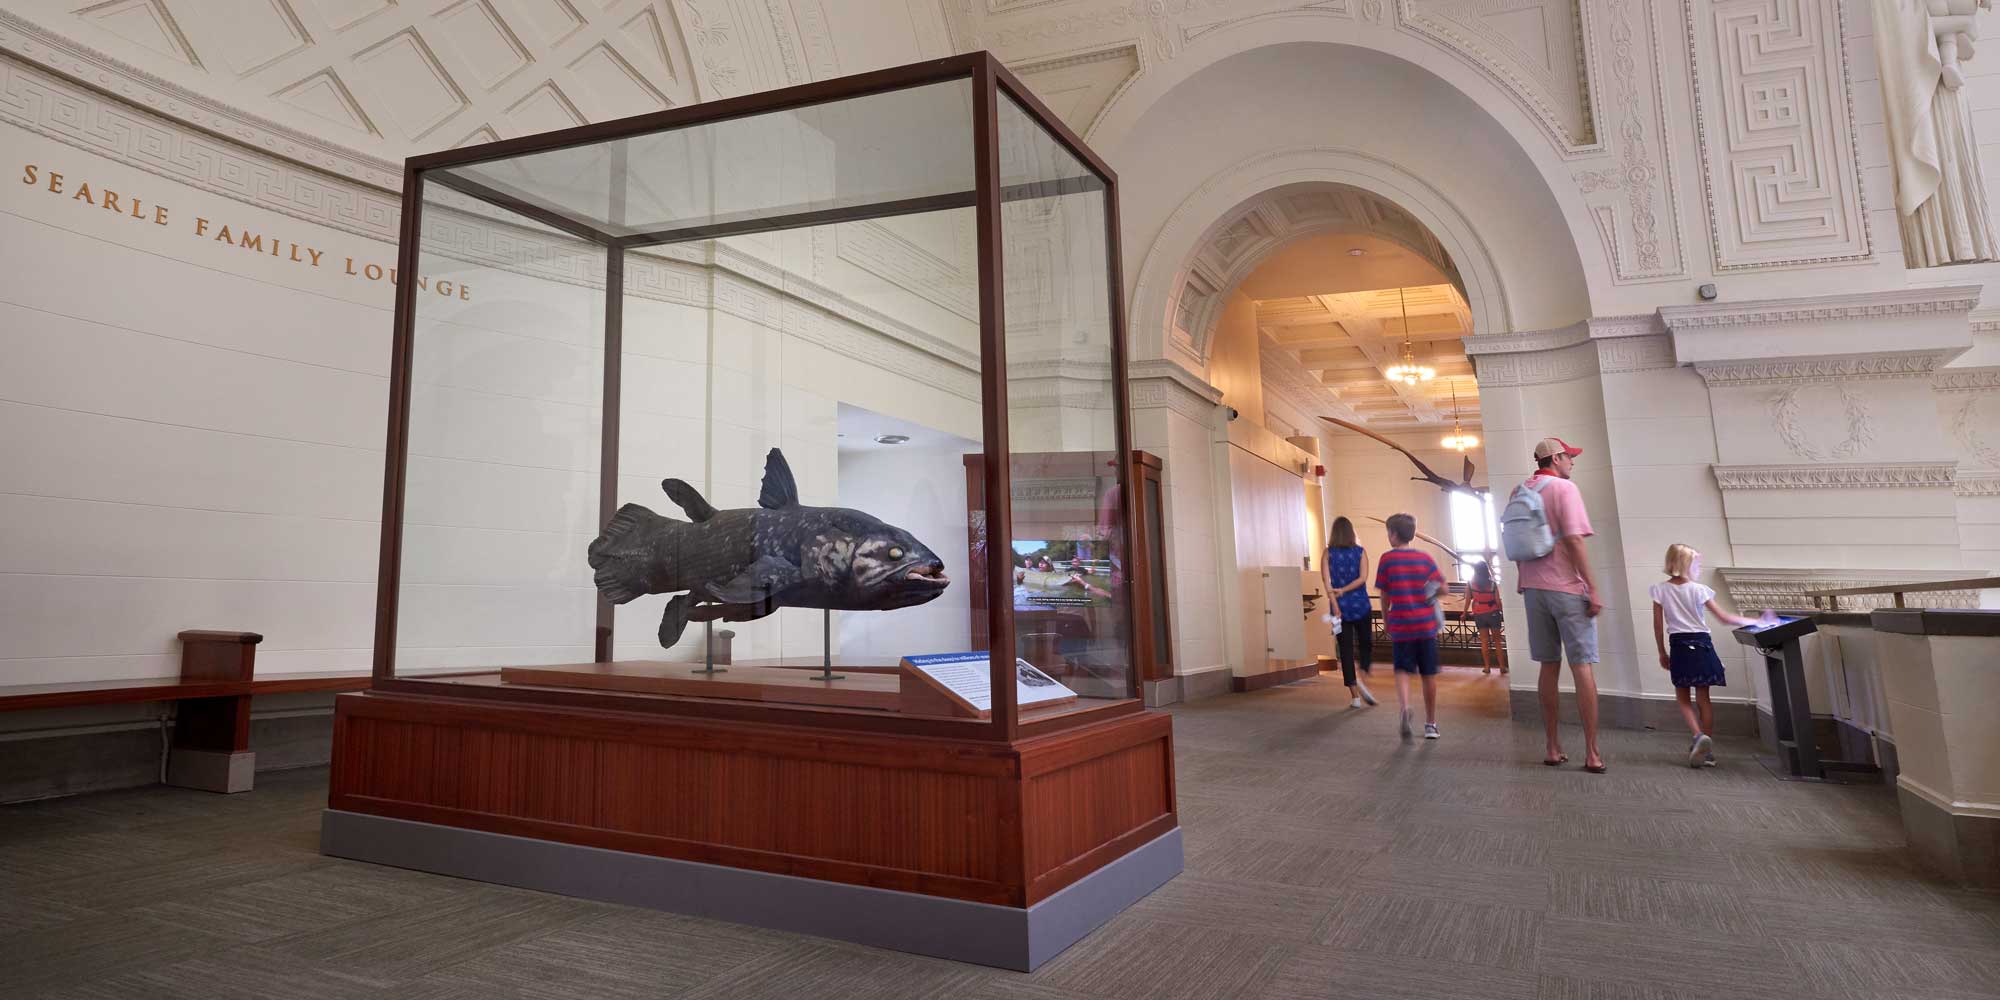 A large fish model in a display case in the Searle Family Lounge. The balcony is framed with neoclassical arches and visitors stop to look at a digital rail.